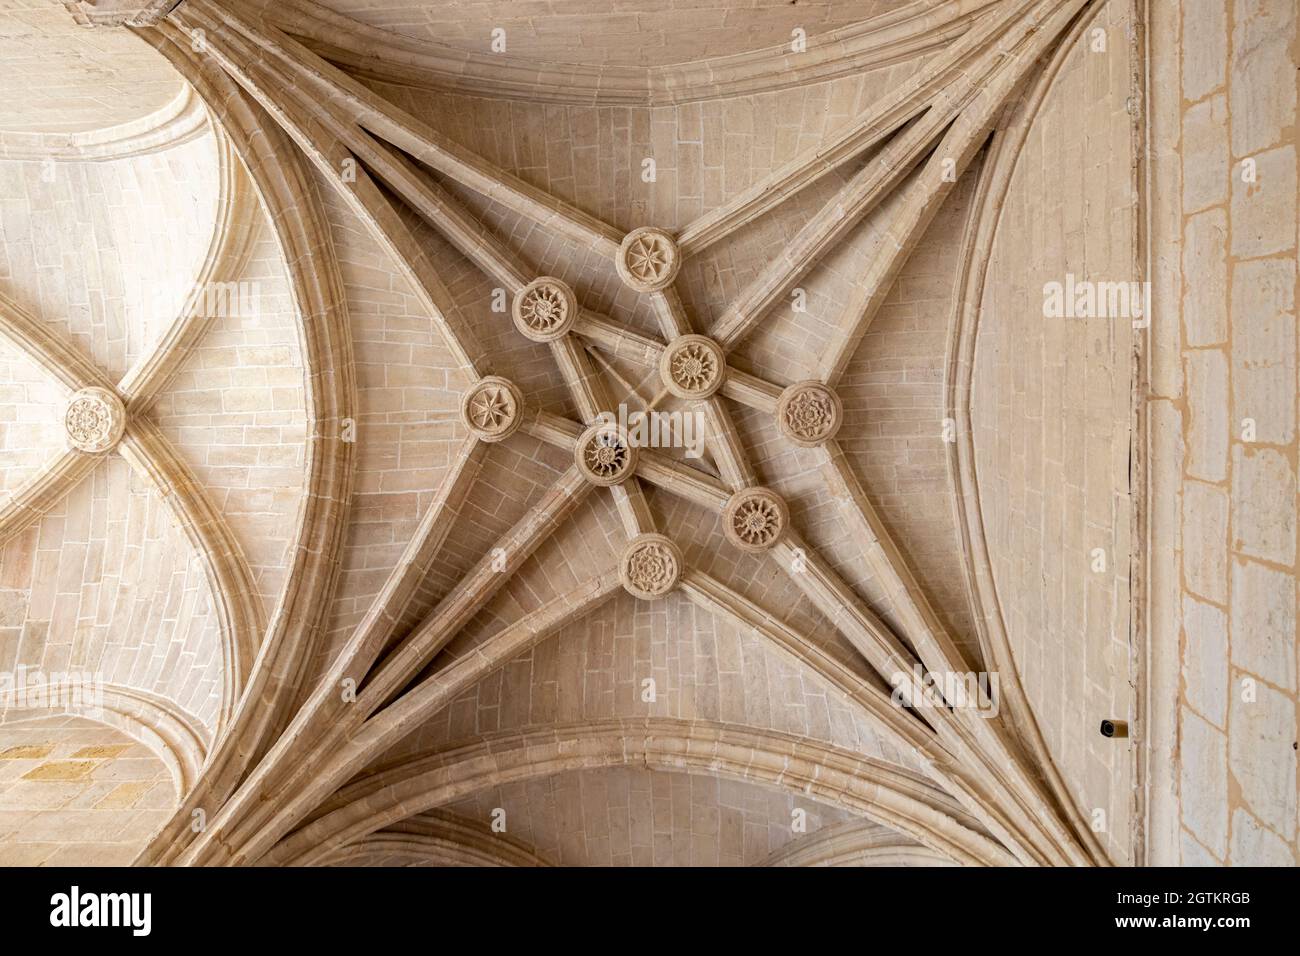 Segovia, Spain. Gothic ribbed vault inside Segovia Cathedral in the cloister Stock Photo